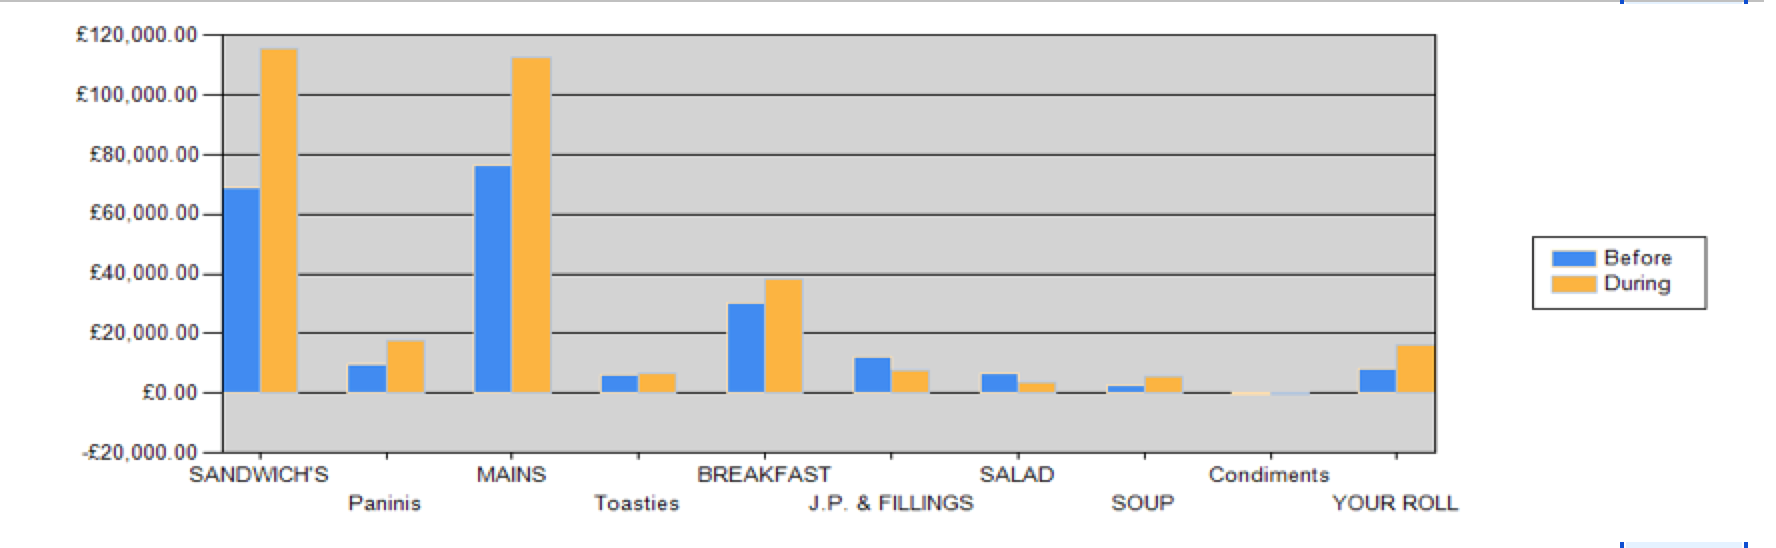 A graph showing café sales data before and during the Kale Yeah! scheme